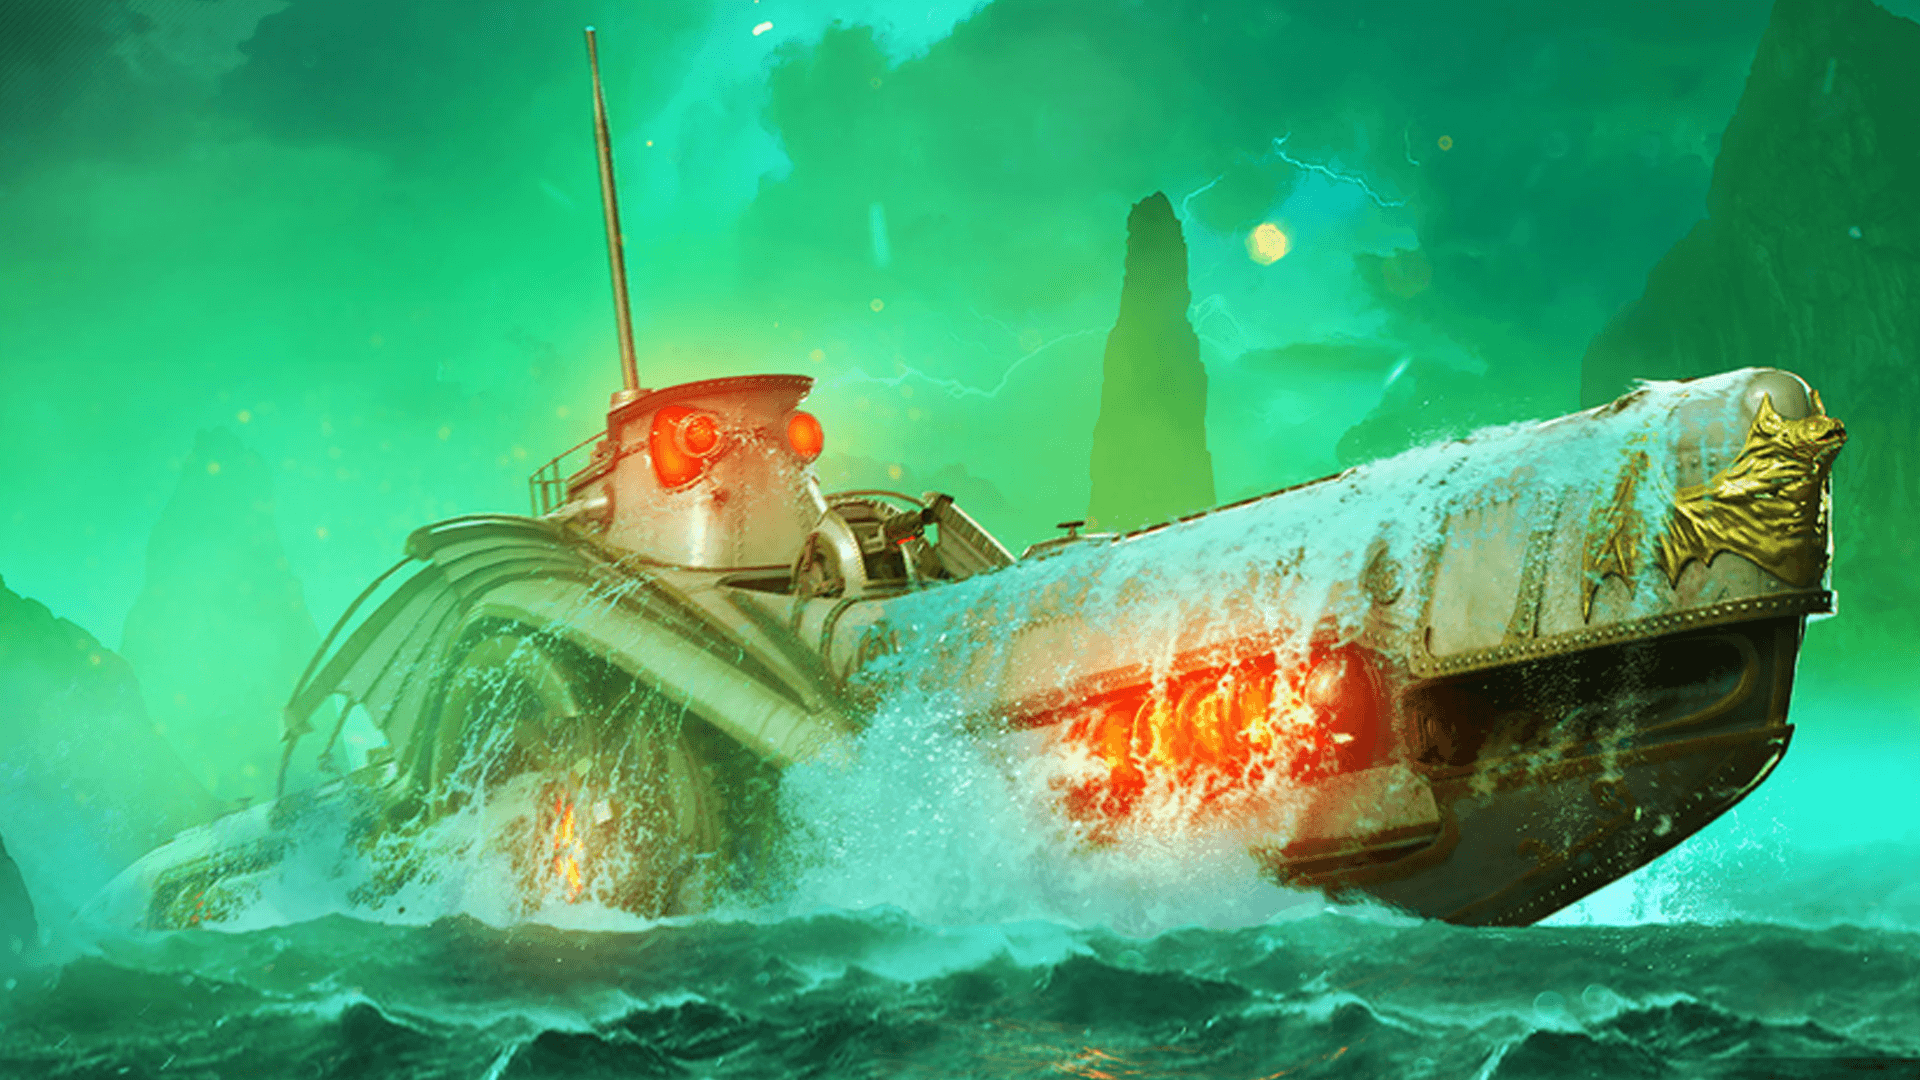 World of Warships gets submarines and giant sea monsters